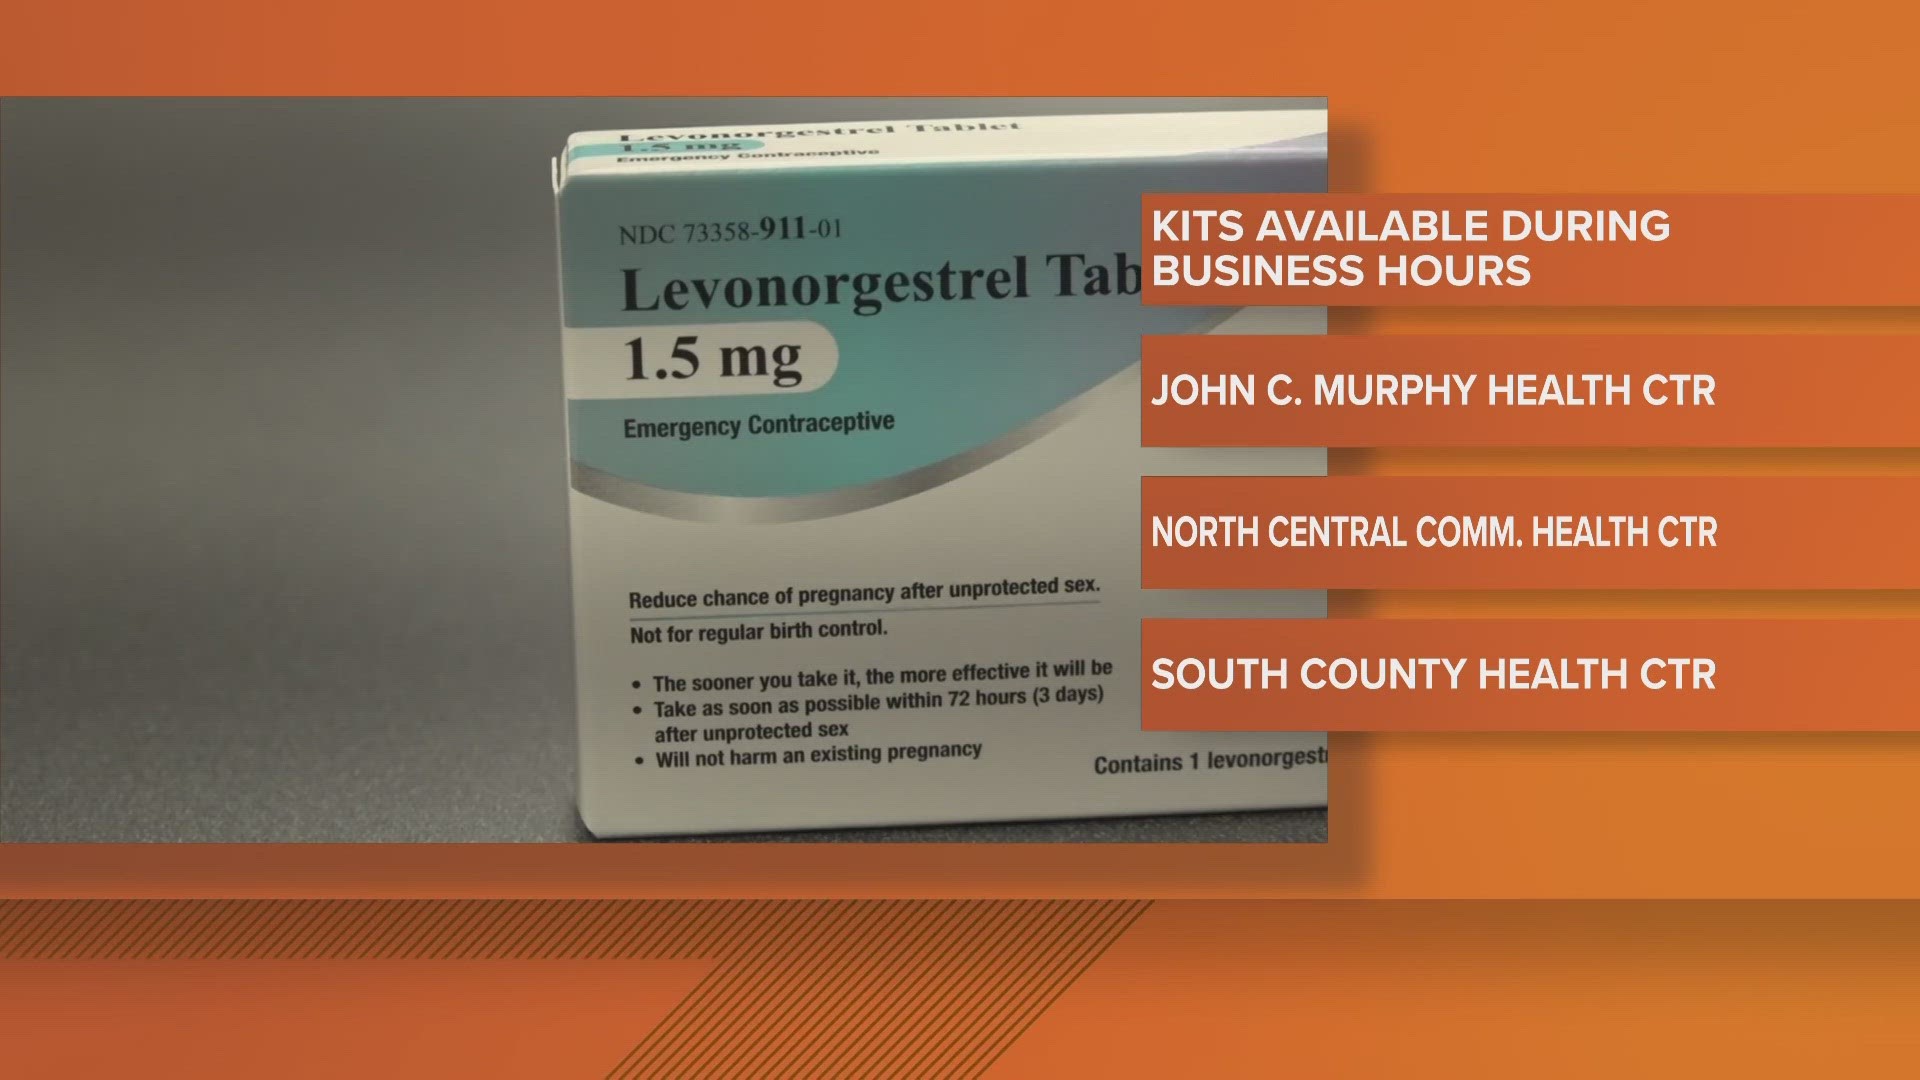 The emergency contraceptive kits can be picked up during regular business hours at St. Louis County health clinics. The county also provides family planning care.